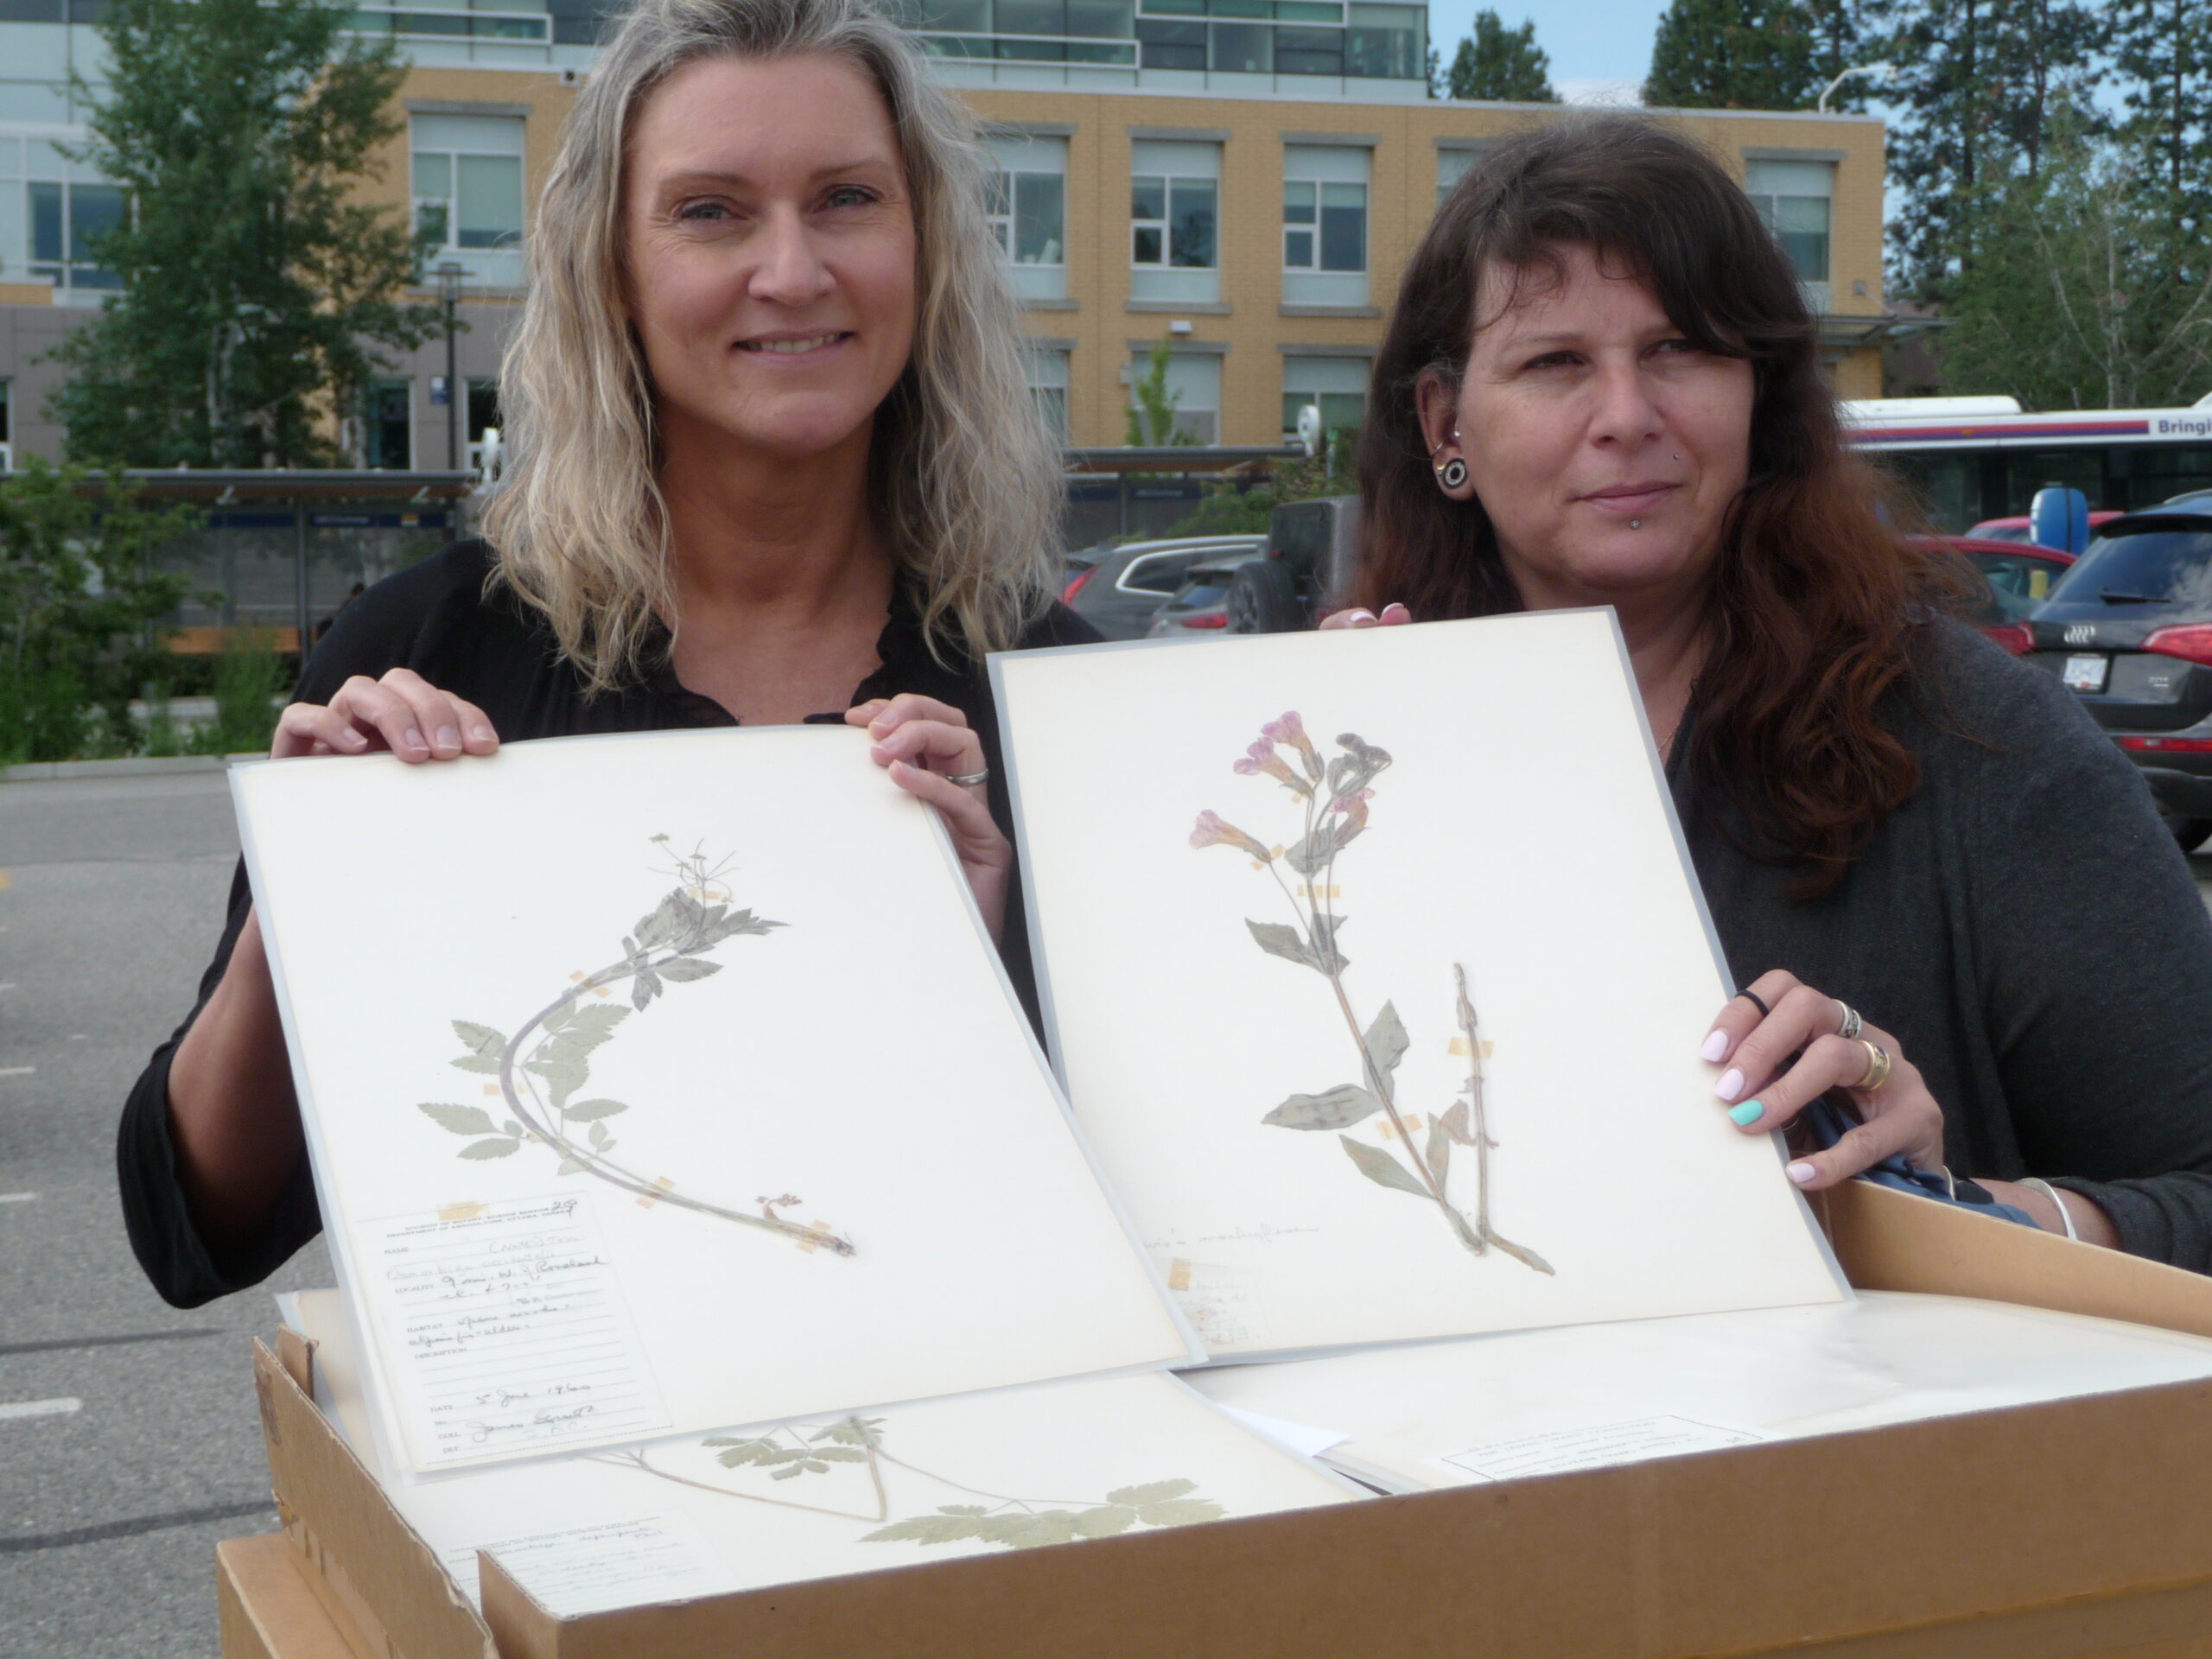 Two women in front of a beige, multi-storied building, holding botanical samples. The woman on the left is blond, and smiling at the camera. The woman on the right has dark red hair with bangs, with piercings on her hair and one below her mouth, and smiling slightly and looking off to her left. The left sample is a green plant with a white flower pressed flat on a sheet of paper between sheets of thin plastic. The right sample has pink, bell-shaped flowers. 